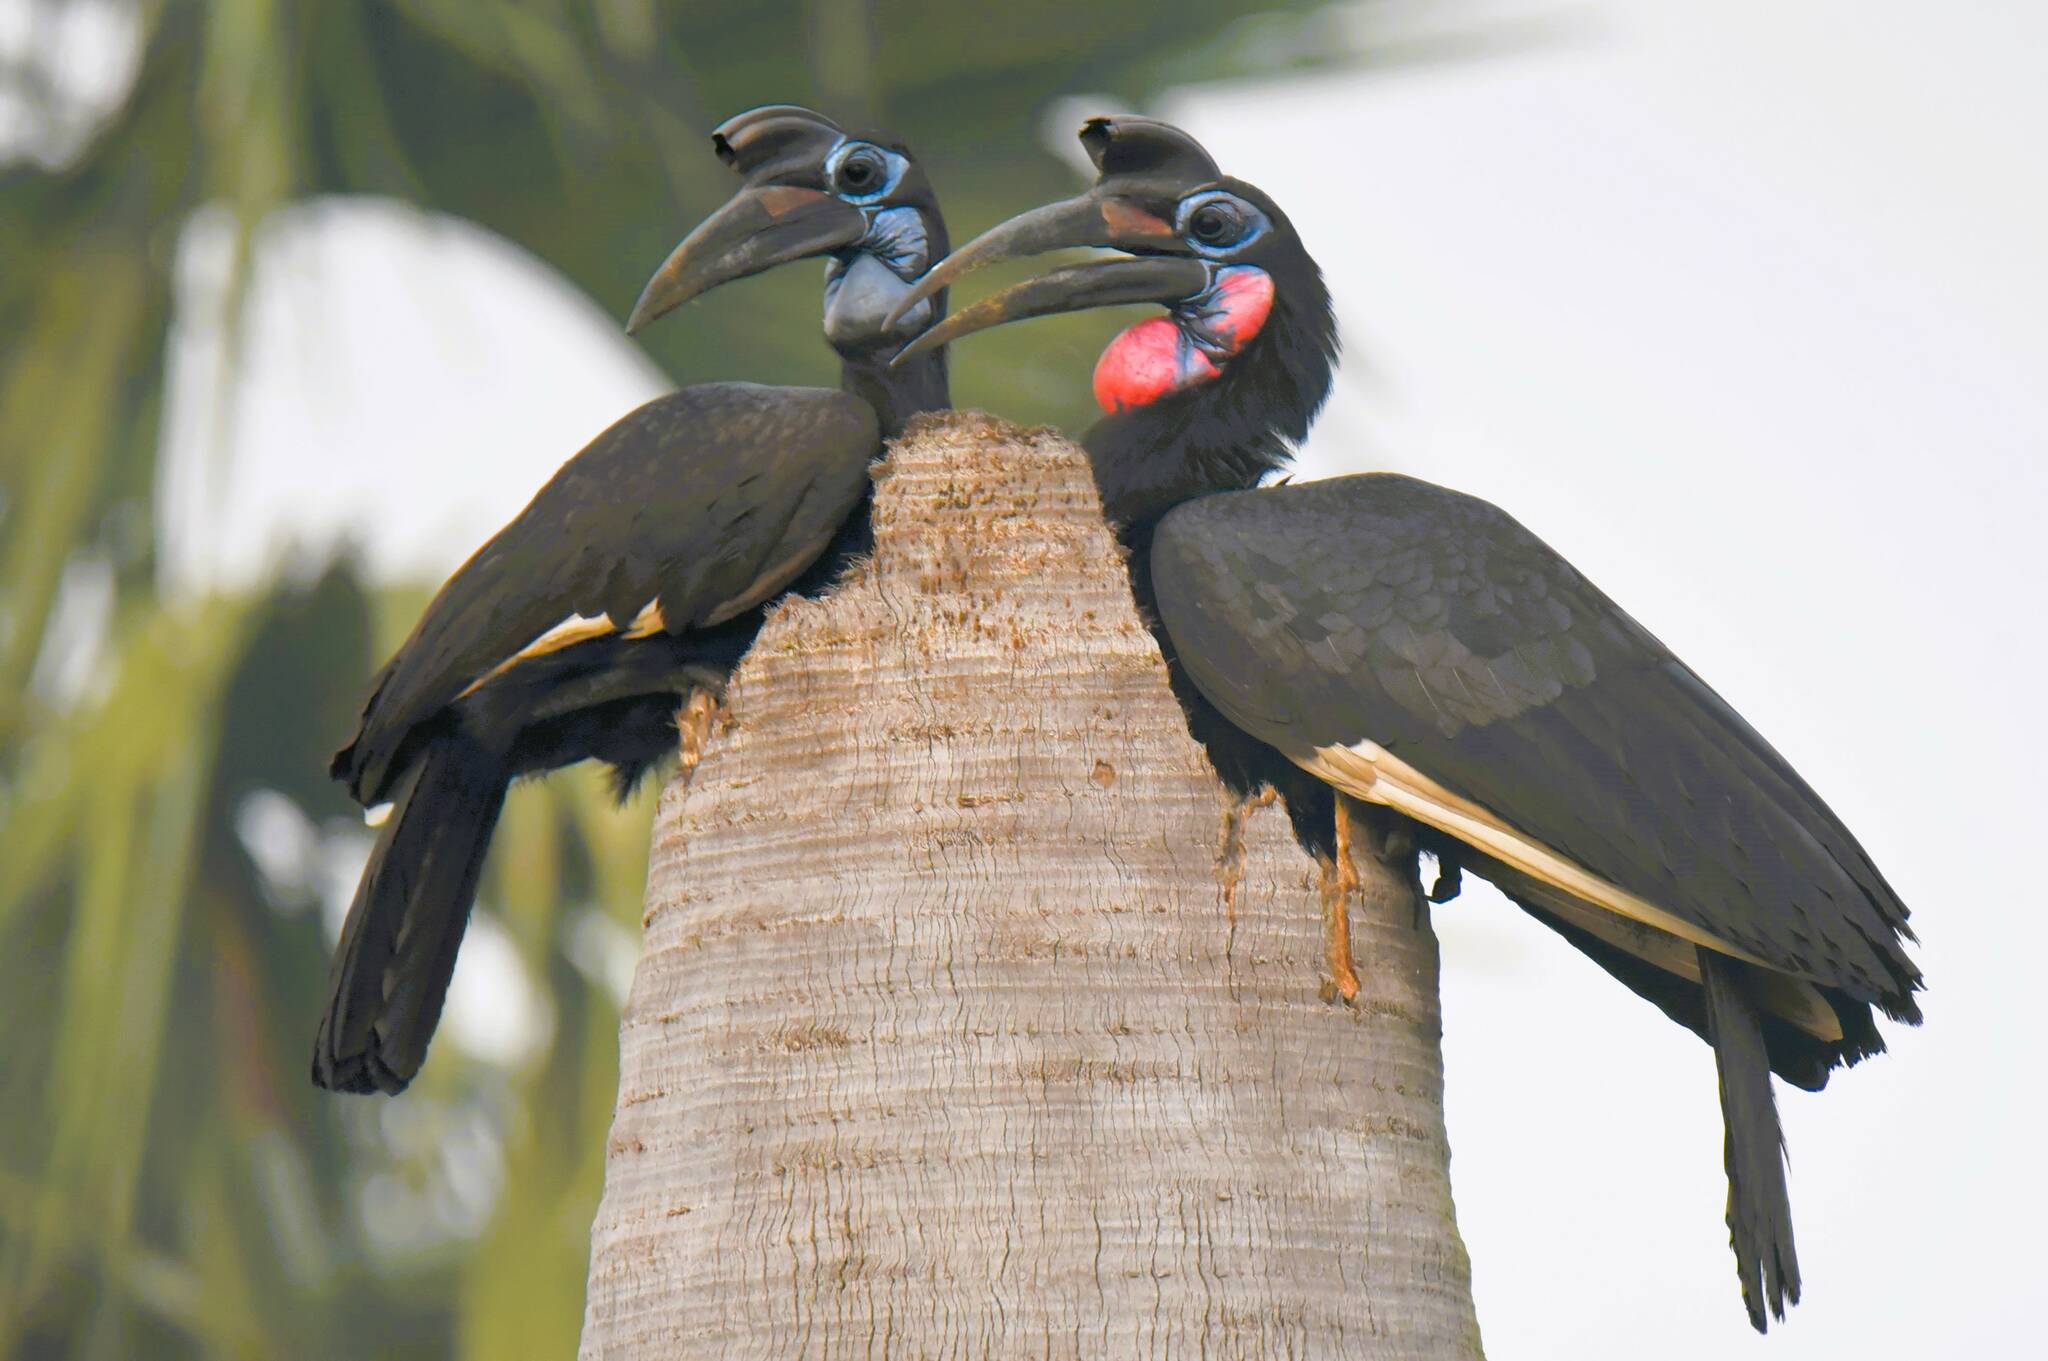 Island photographer Jim Diers captured this photo of a pair of Abyssinian ground hornbills during his recent trip to Uganda. Diers gave a presentation on that trip following a vote on Monday (April 15) evening by the Vashon Audubon to rename itself to the Vashon Bird Alliance.